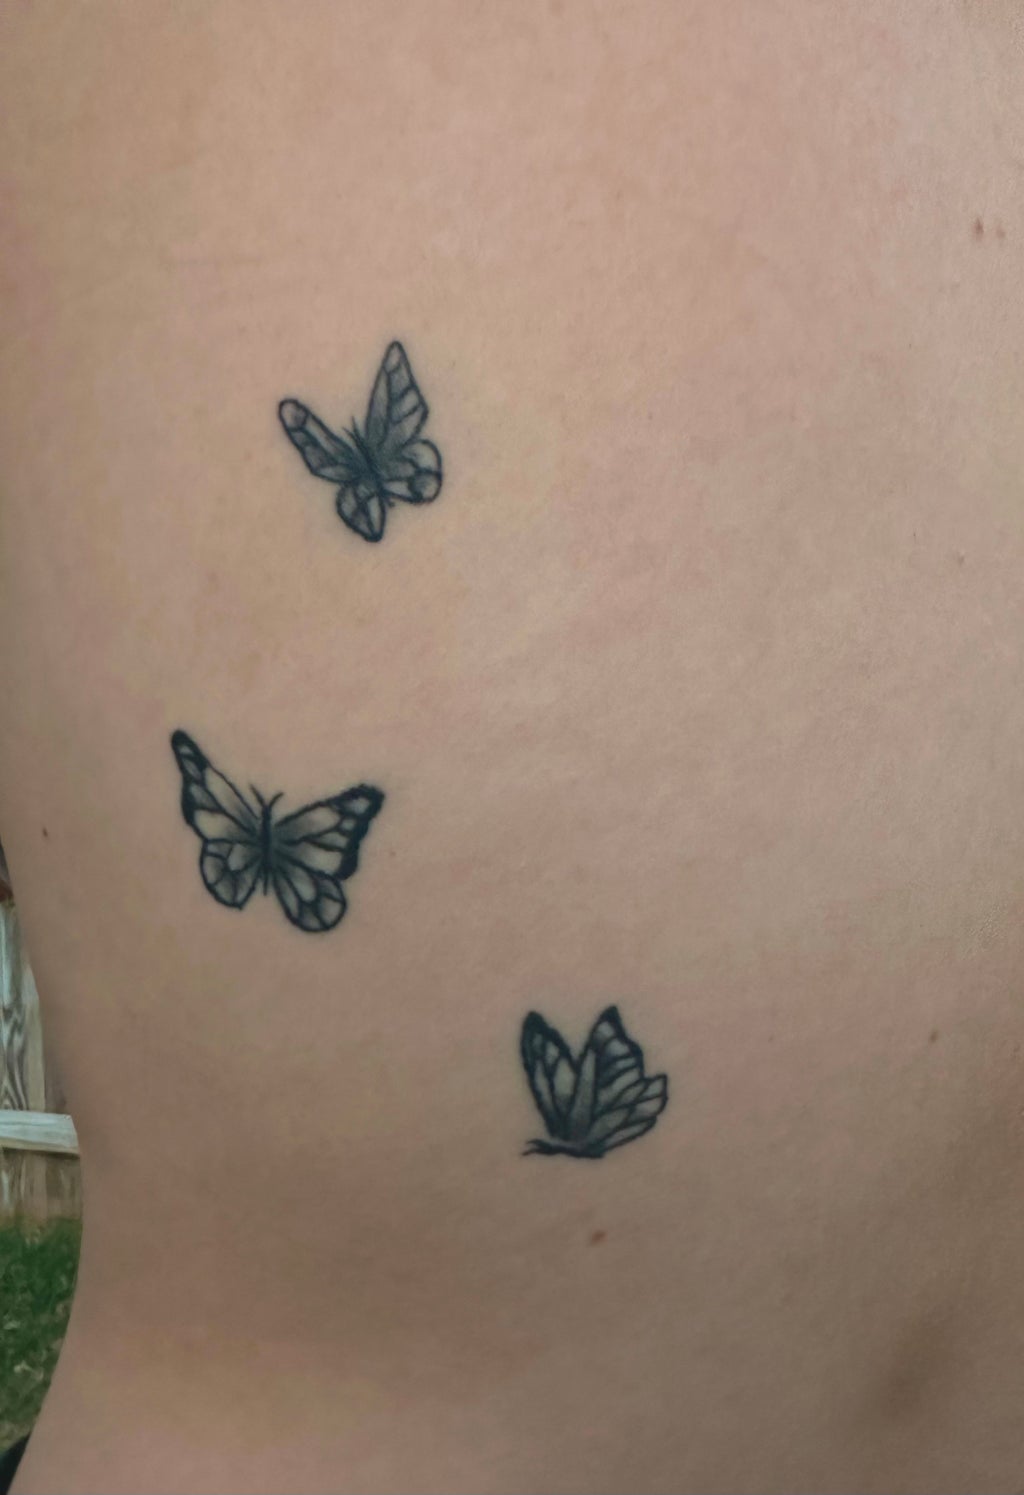 three butterflies tattoo on left side of back